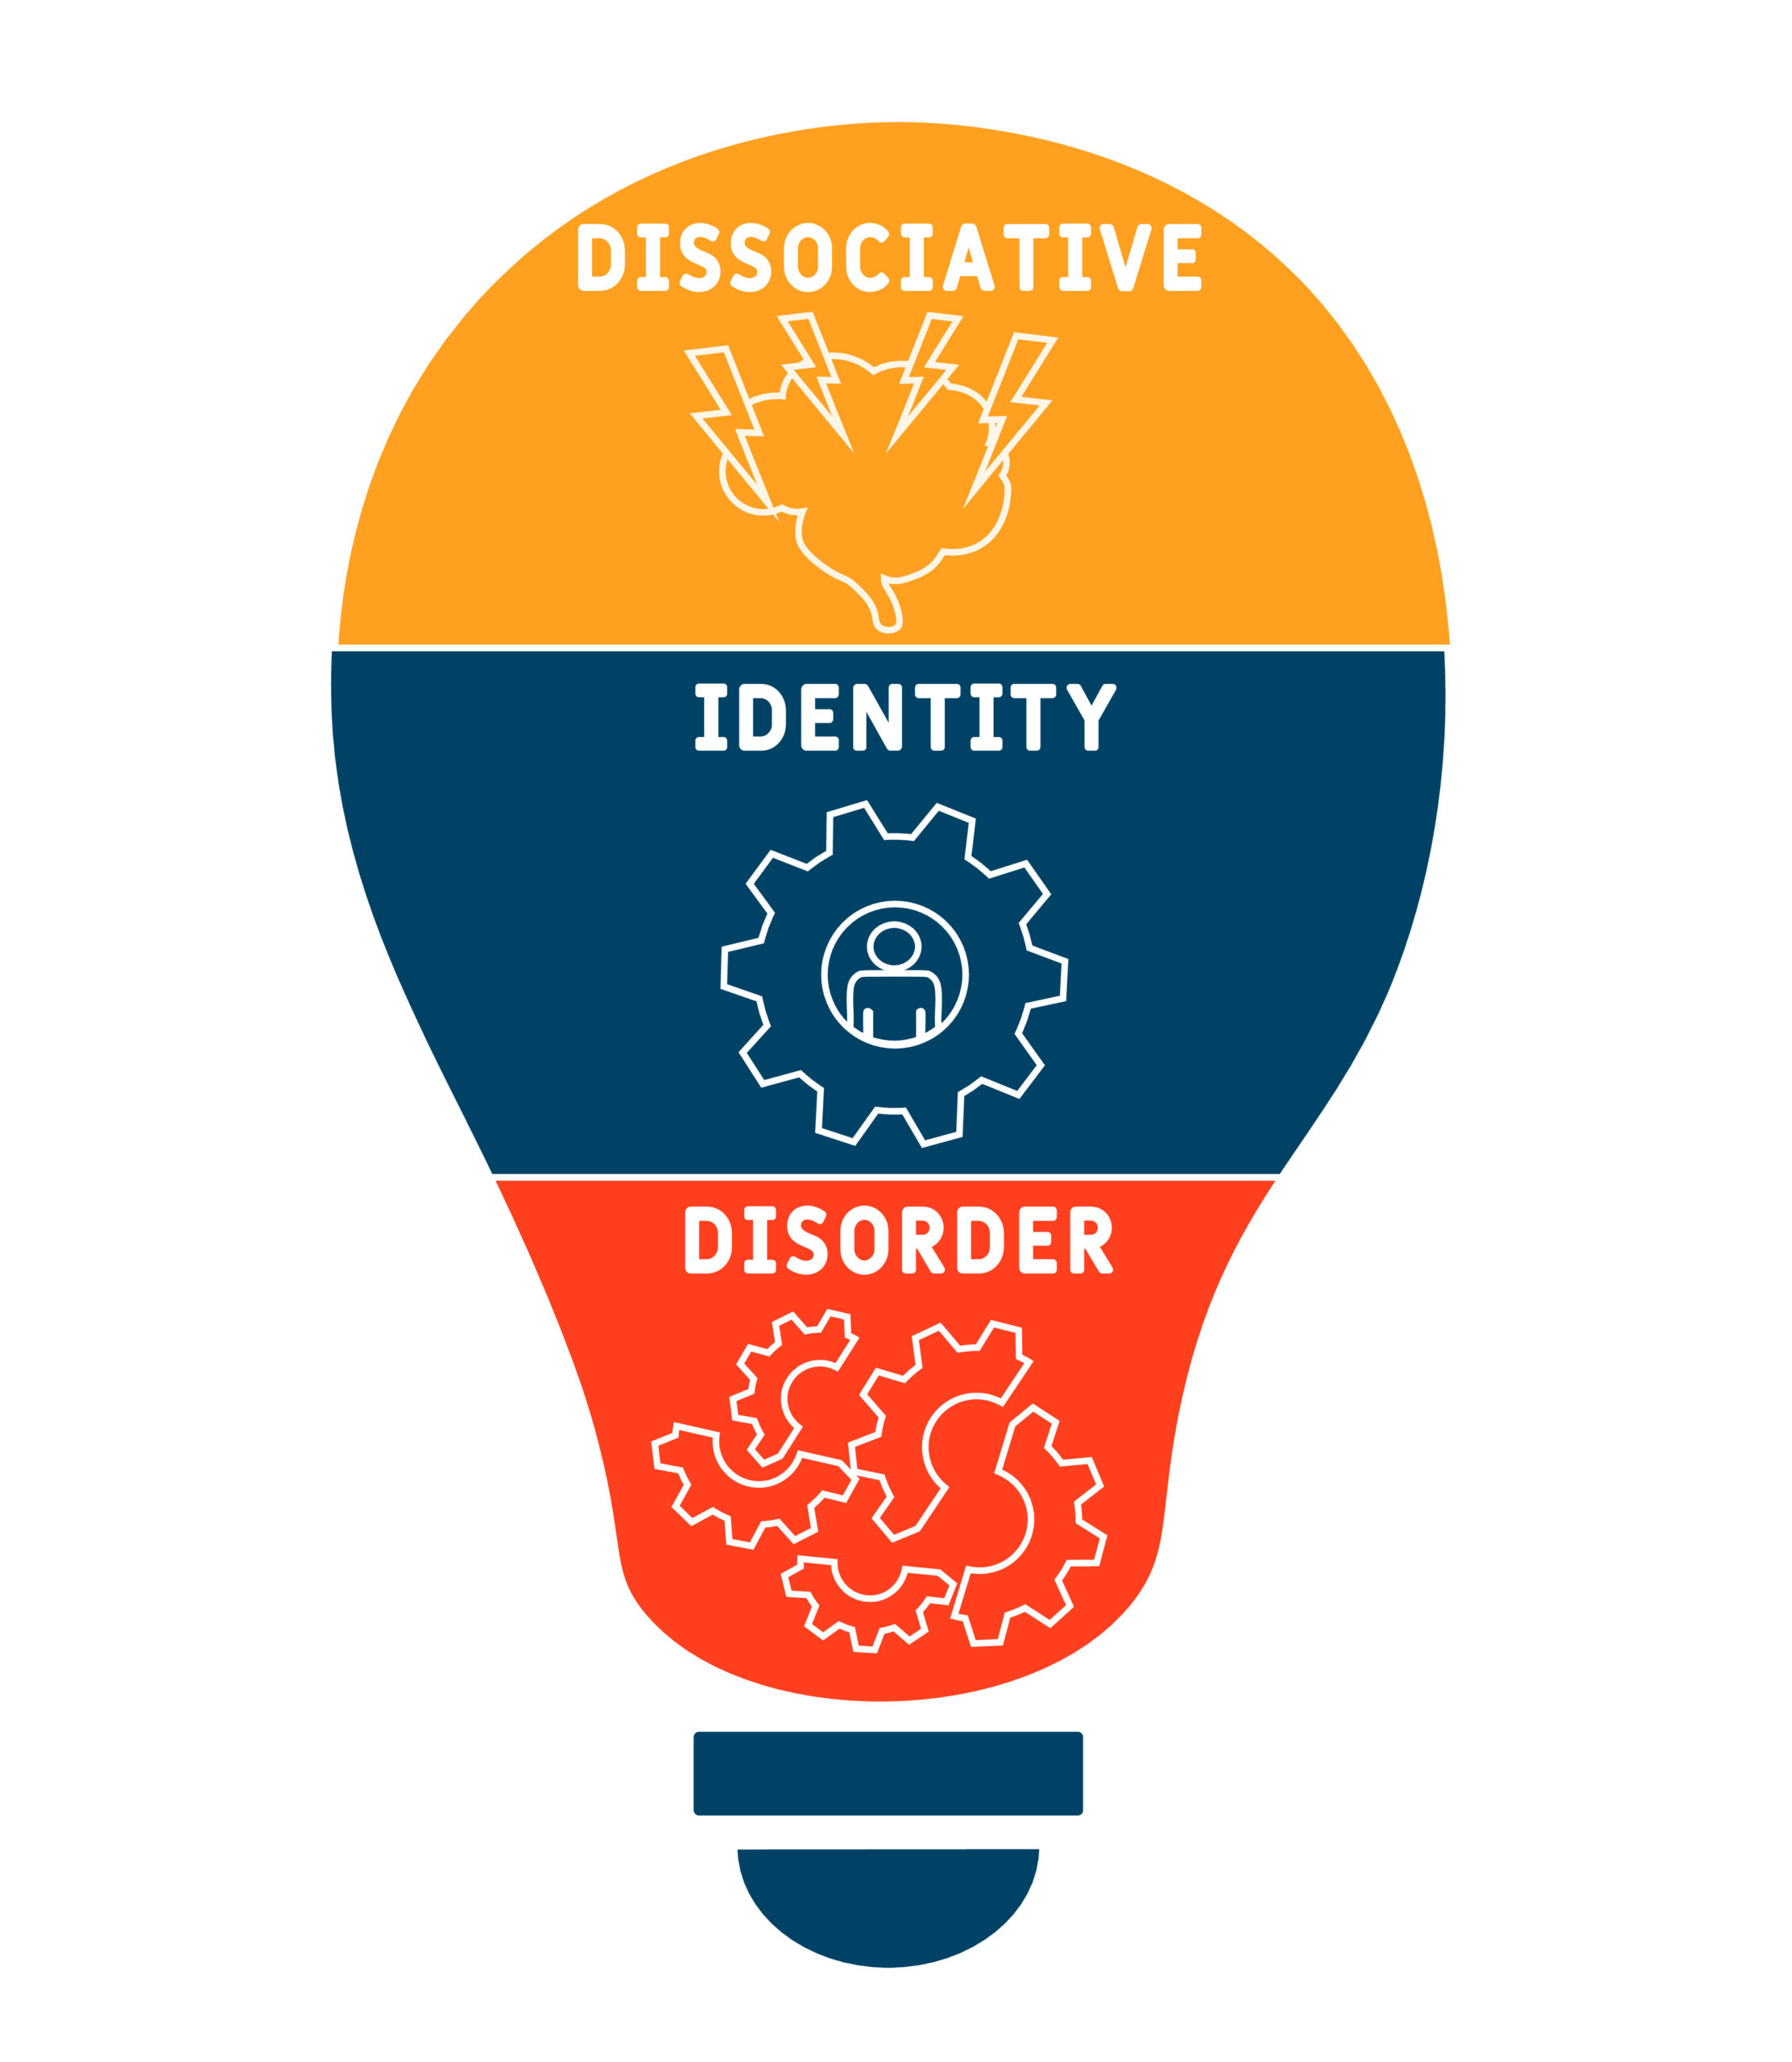 Illustration in the shape of a lightbulb with dissociative at the top, identity in the middle, and disorder at the bottom.